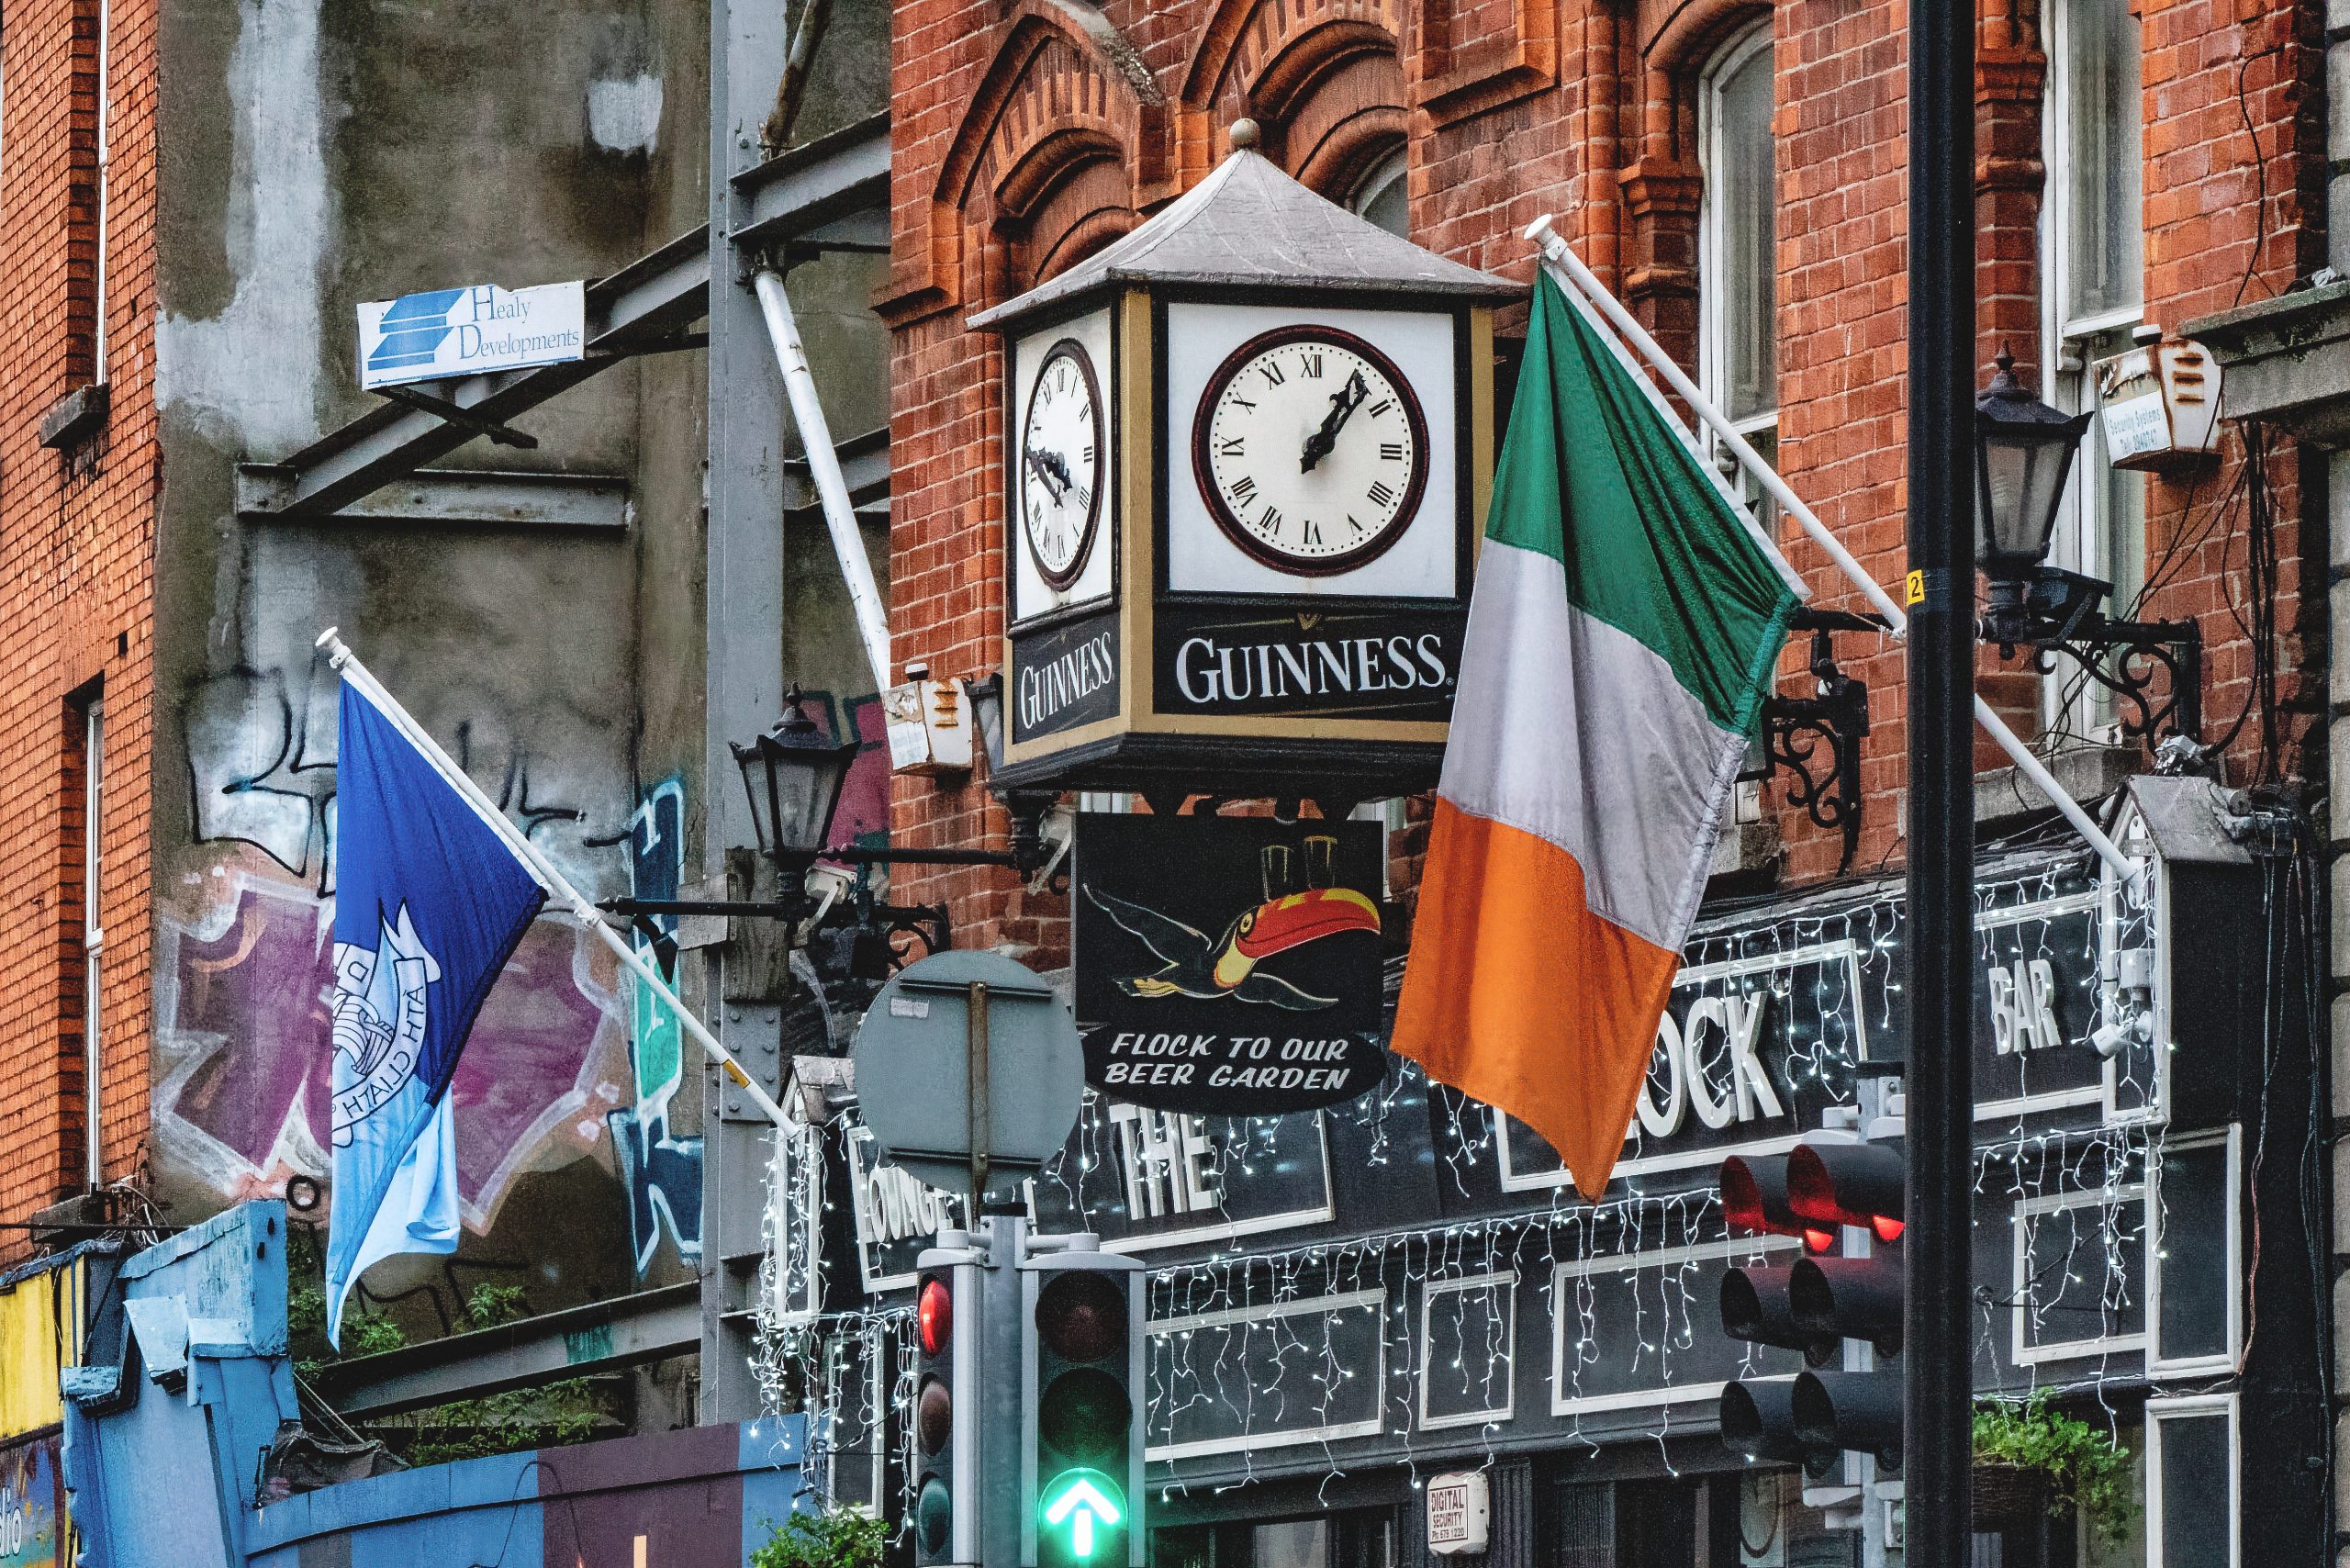 THE GUINNESS CLOCK AT THE CLOCK PUB ON THOMAS STREET